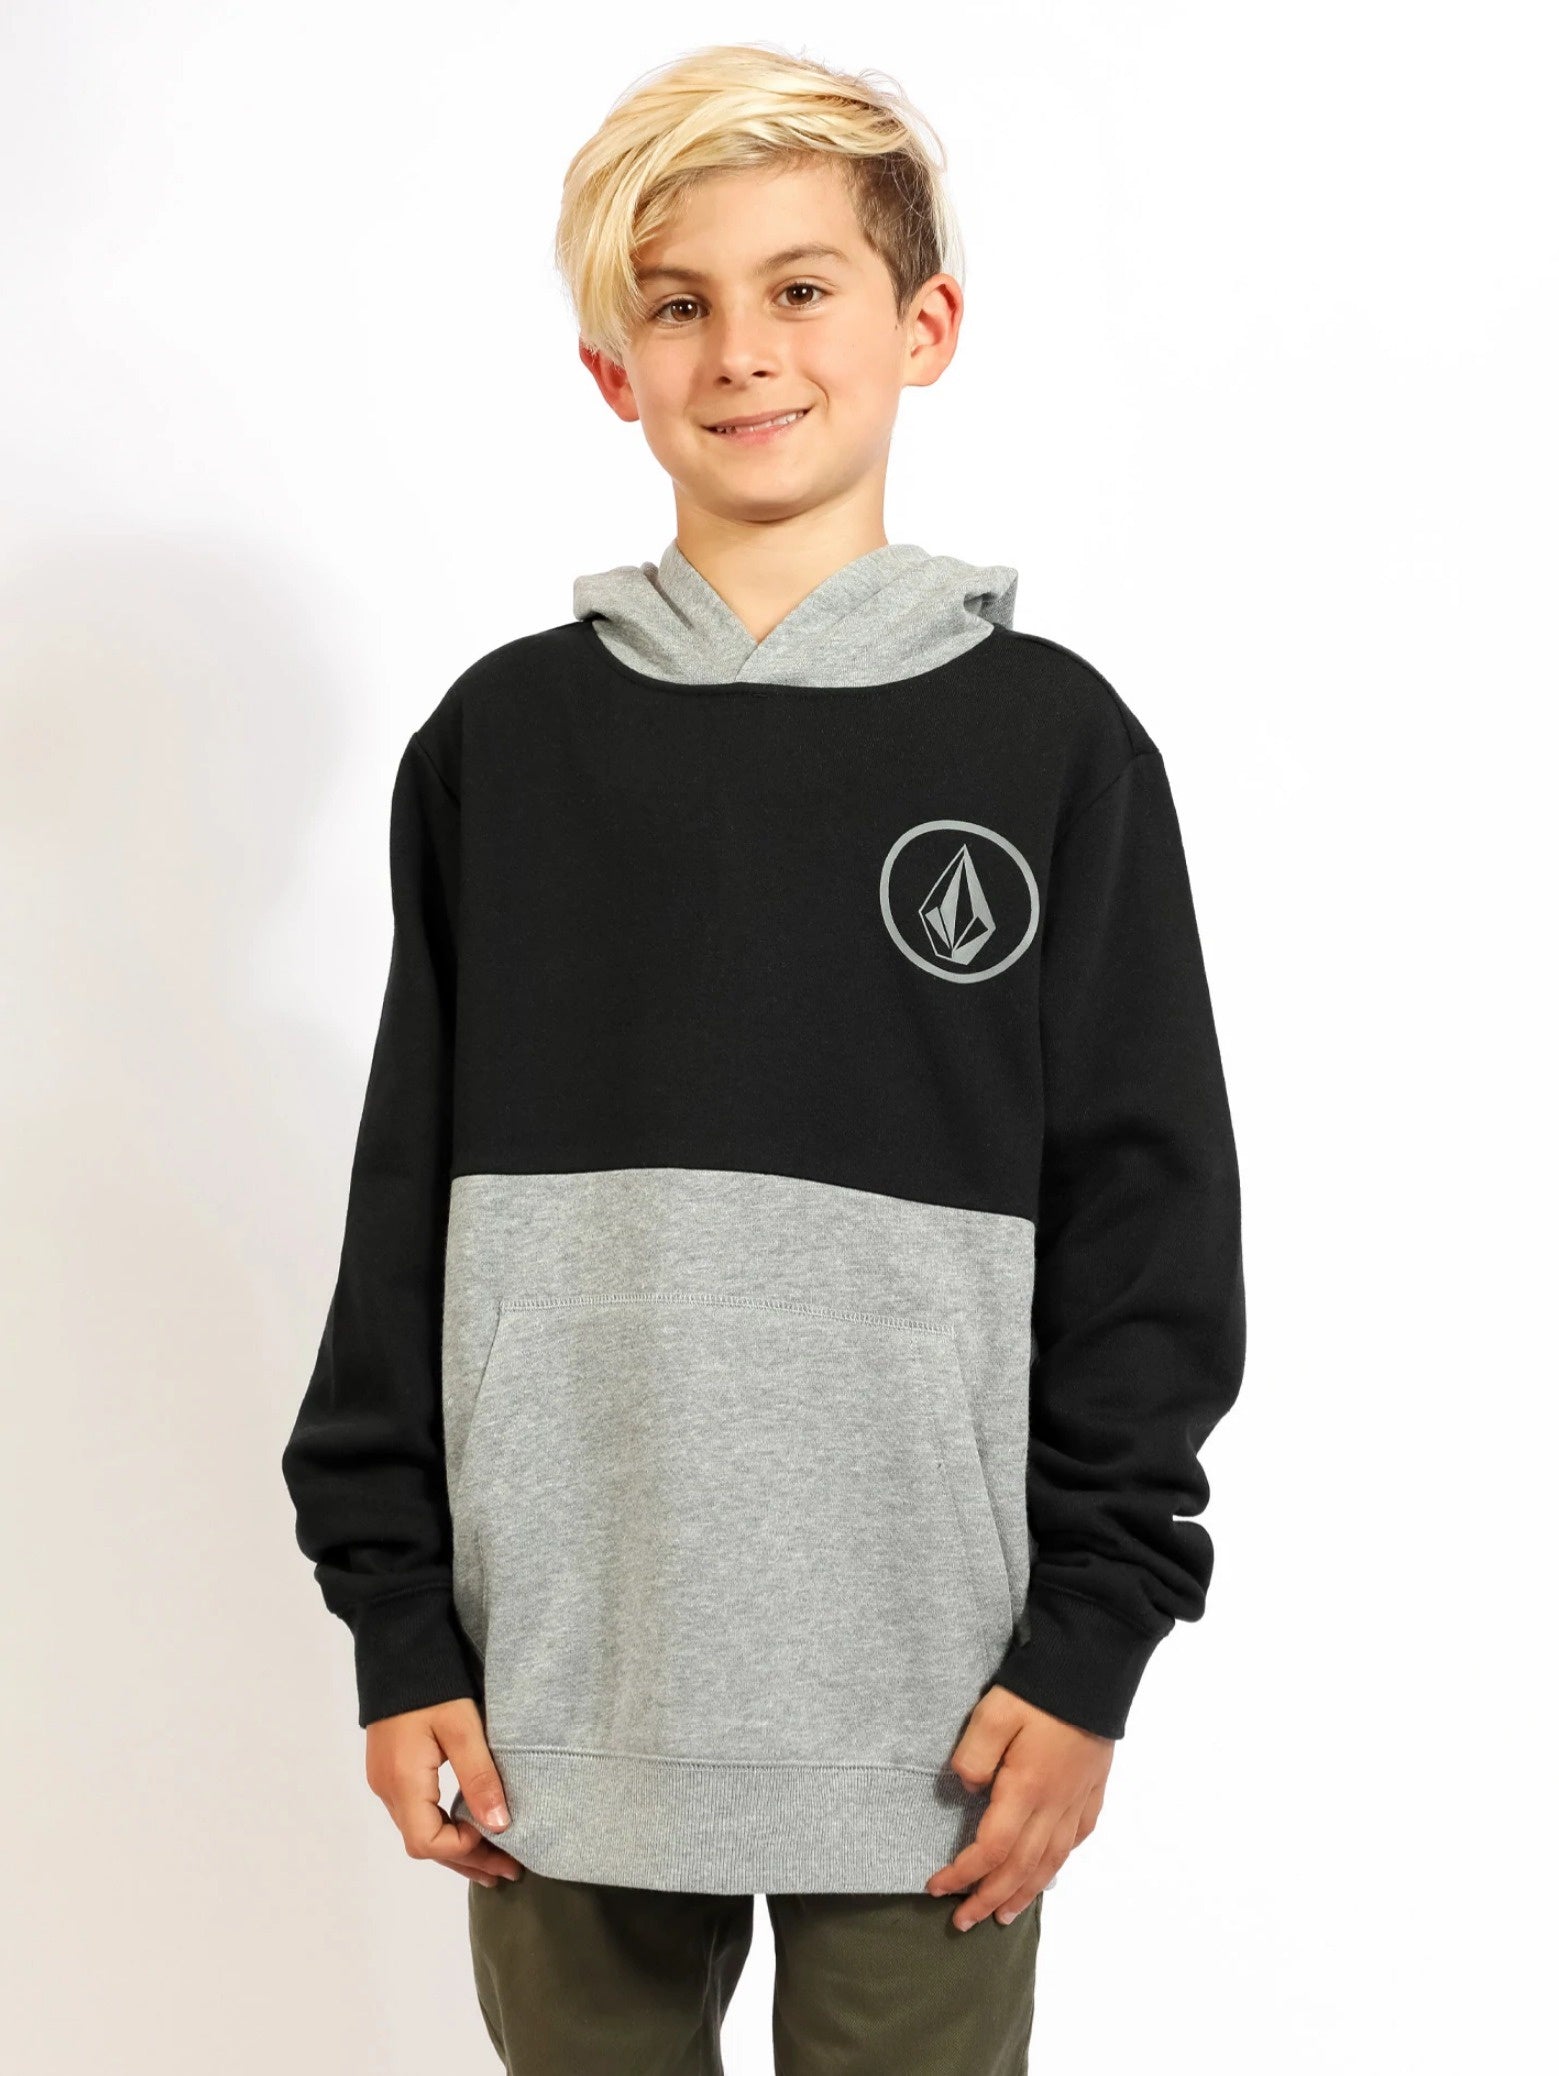 BOYS YOUTH STONE CB PULLOVER